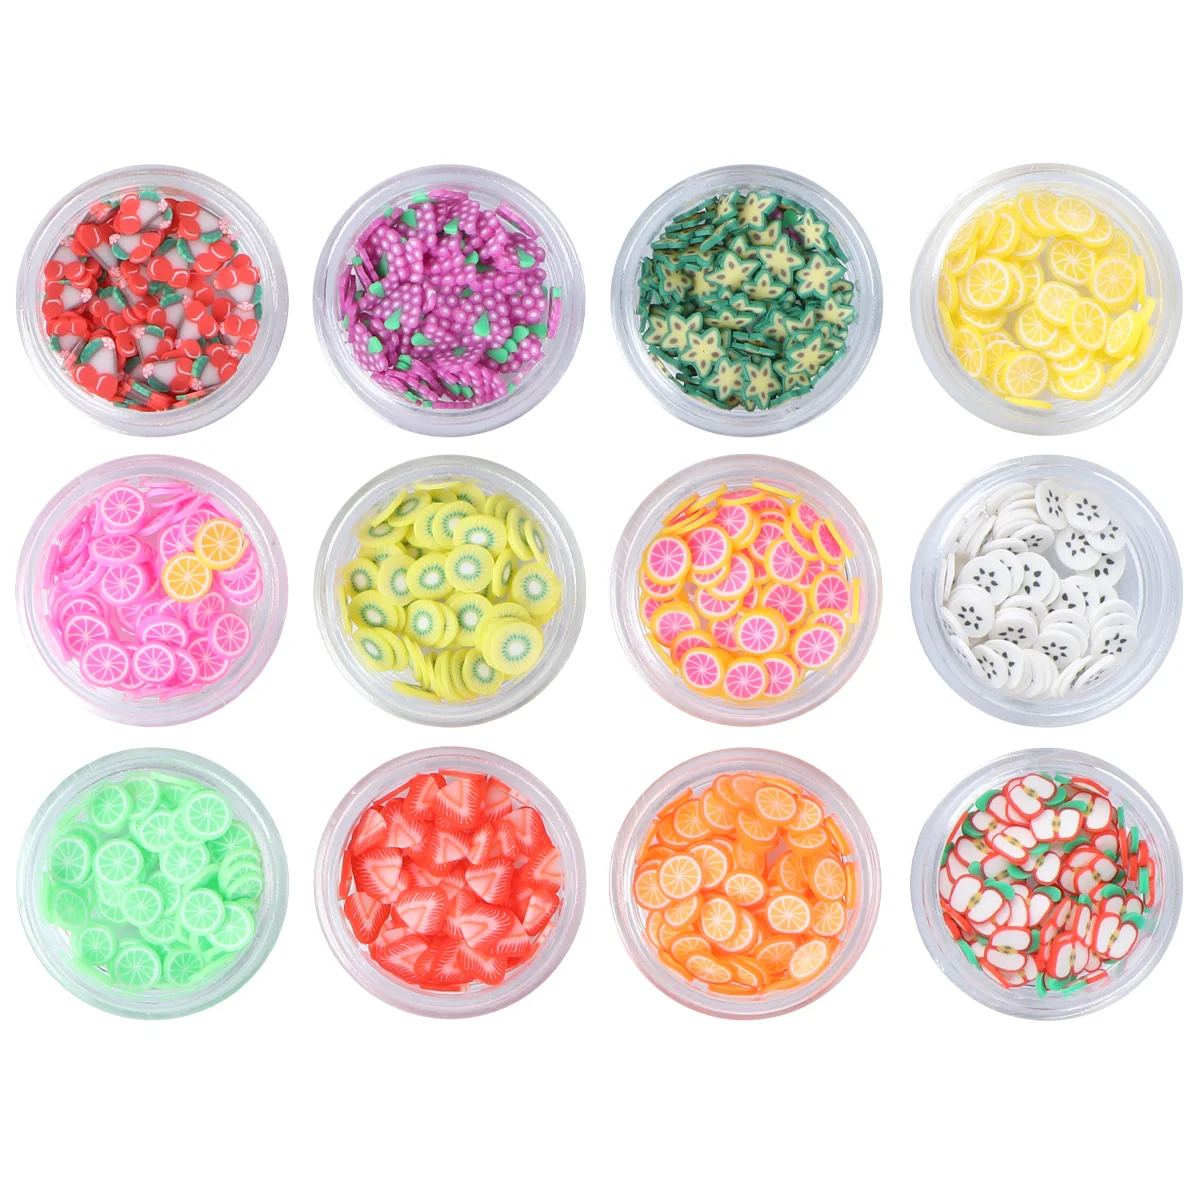 

1 Set Slice Fruit Clay Making Supply Nail Fruit Series 12 Kinds of Boxed Fruit Slices DIY Nail Decoration Random Style